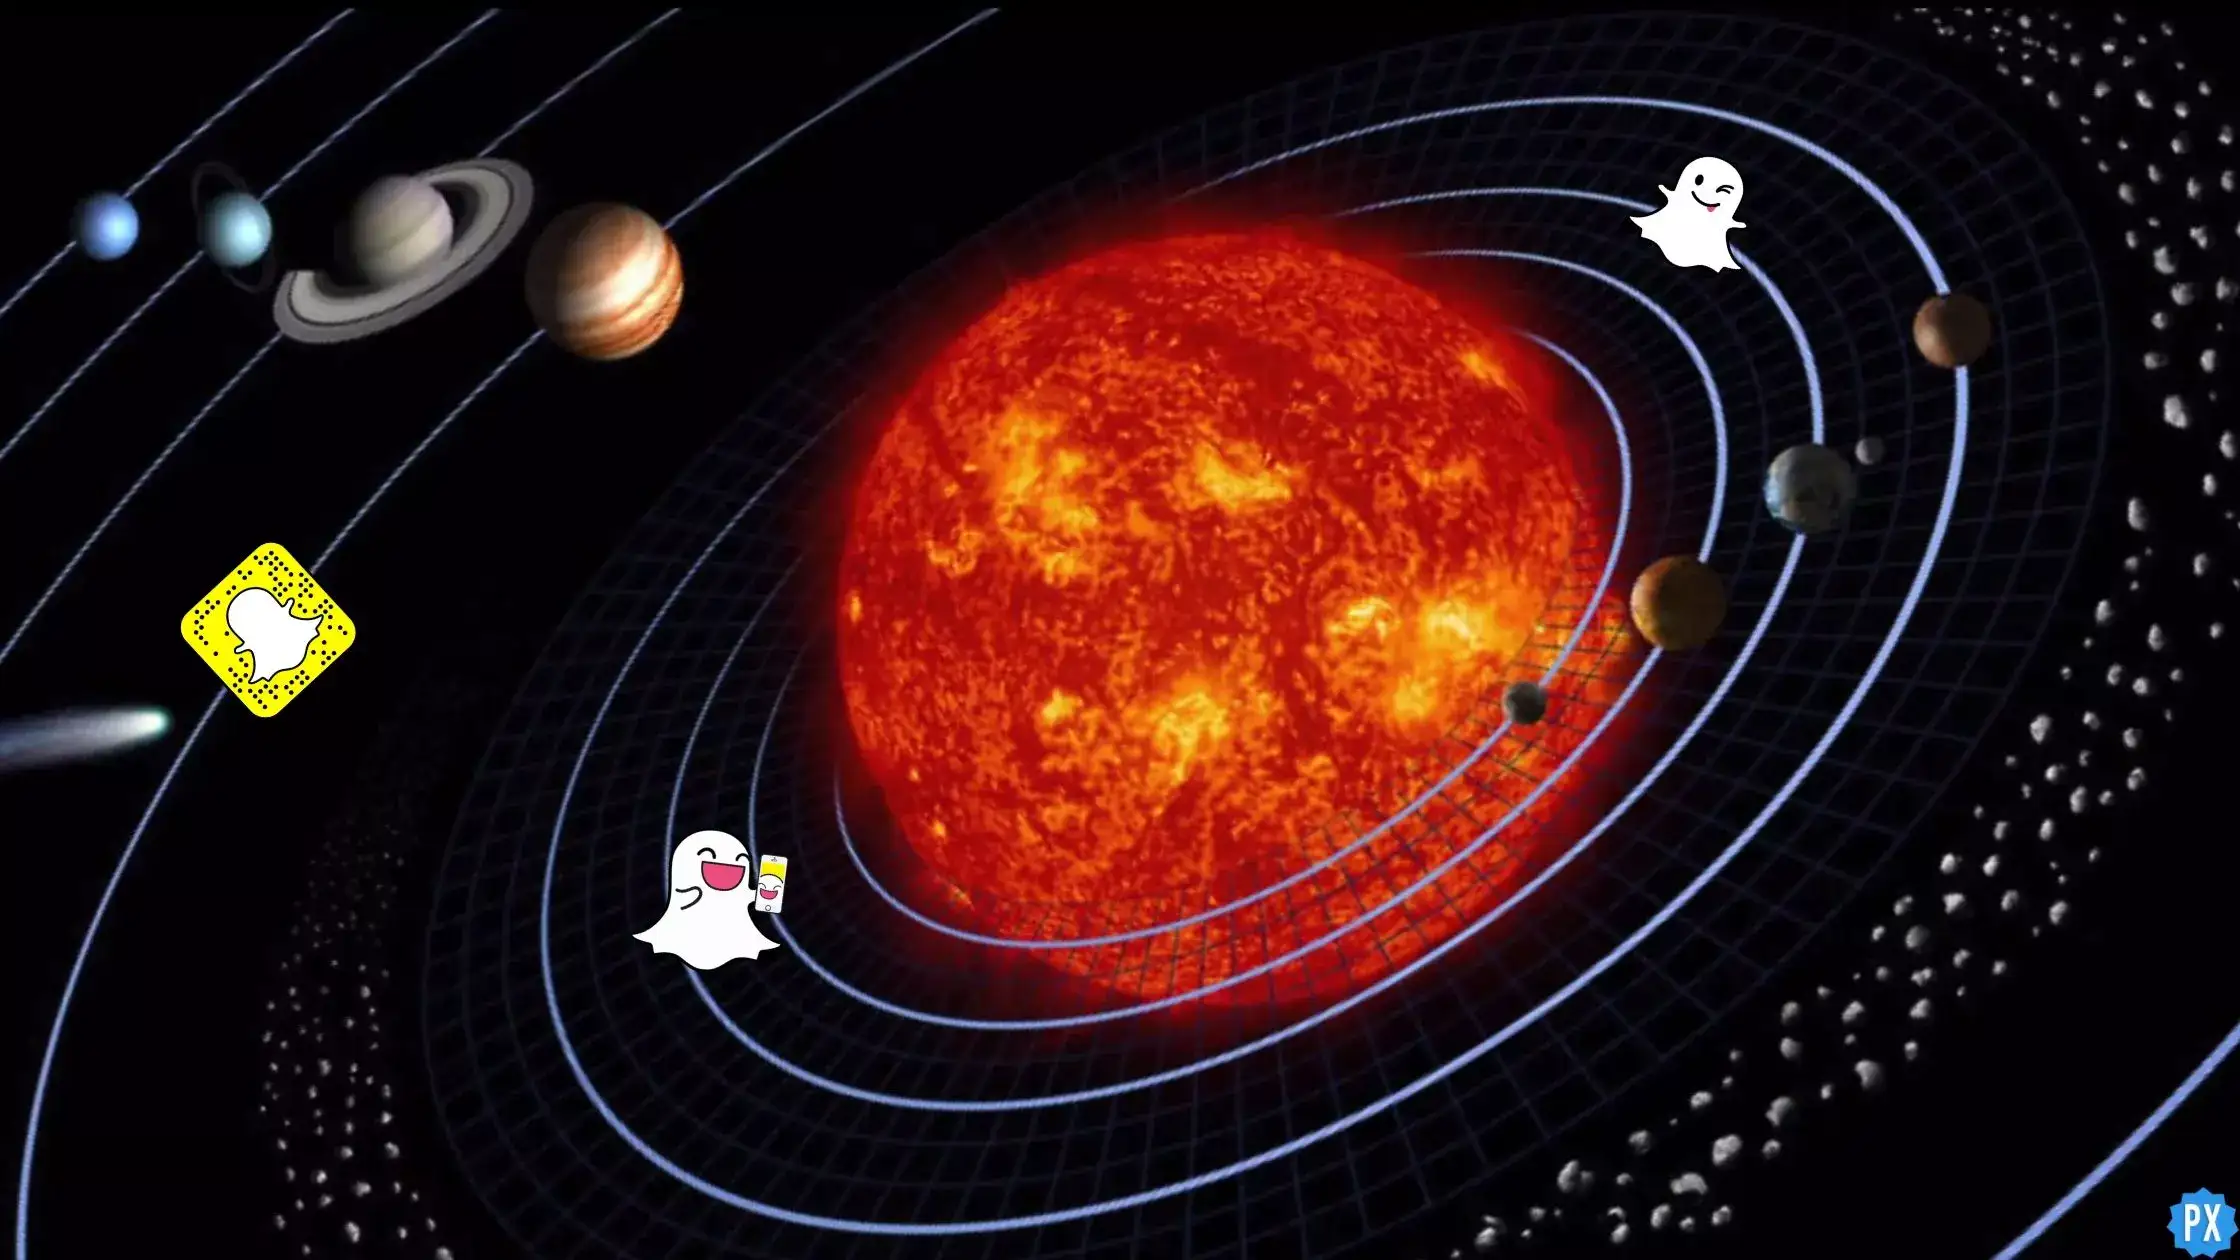 Snapchat logos are shown in space.